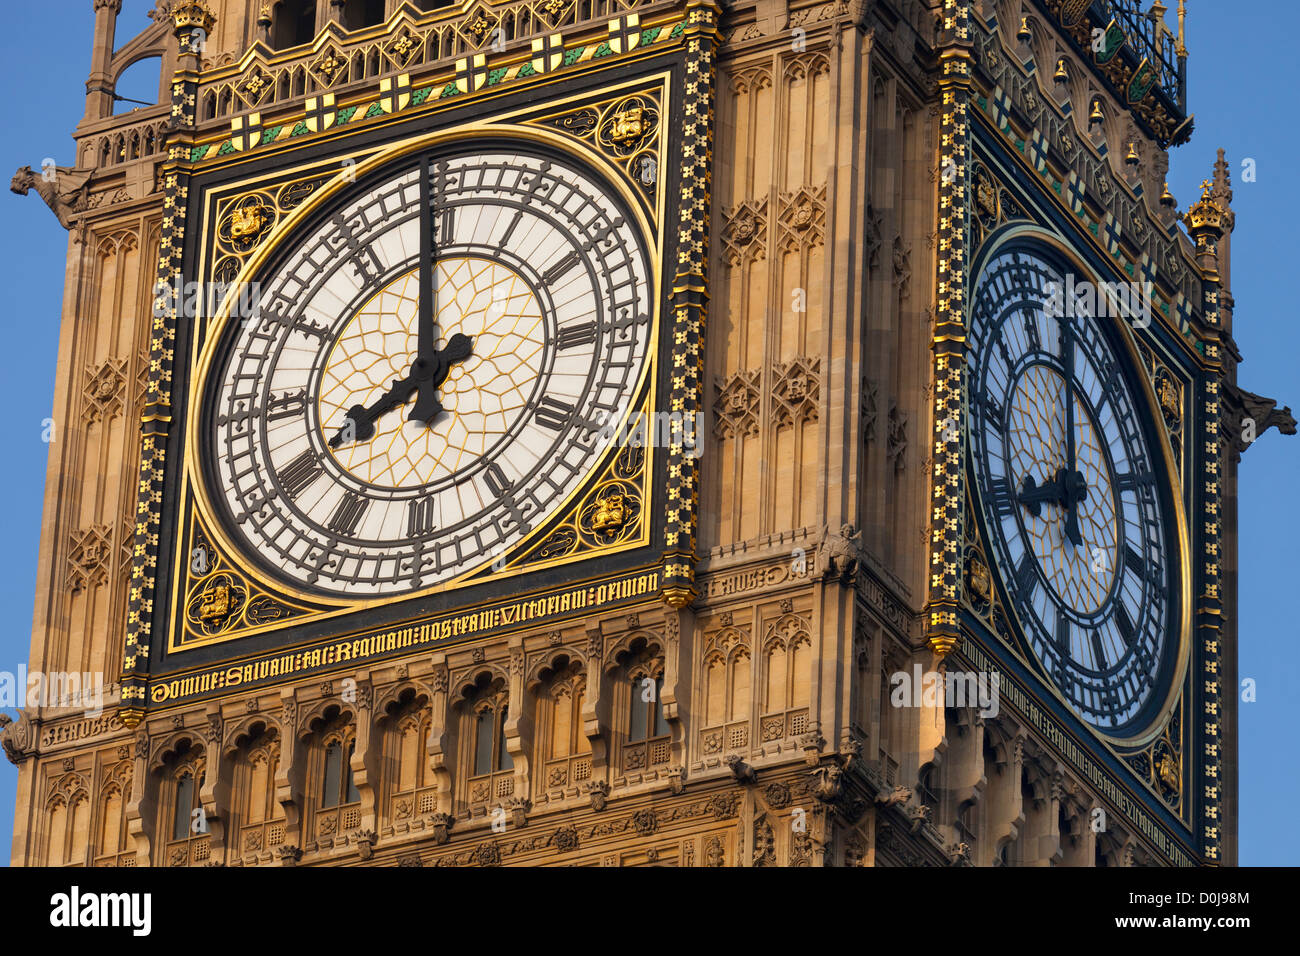 Detail of the clock face of Big Ben in London. Stock Photo